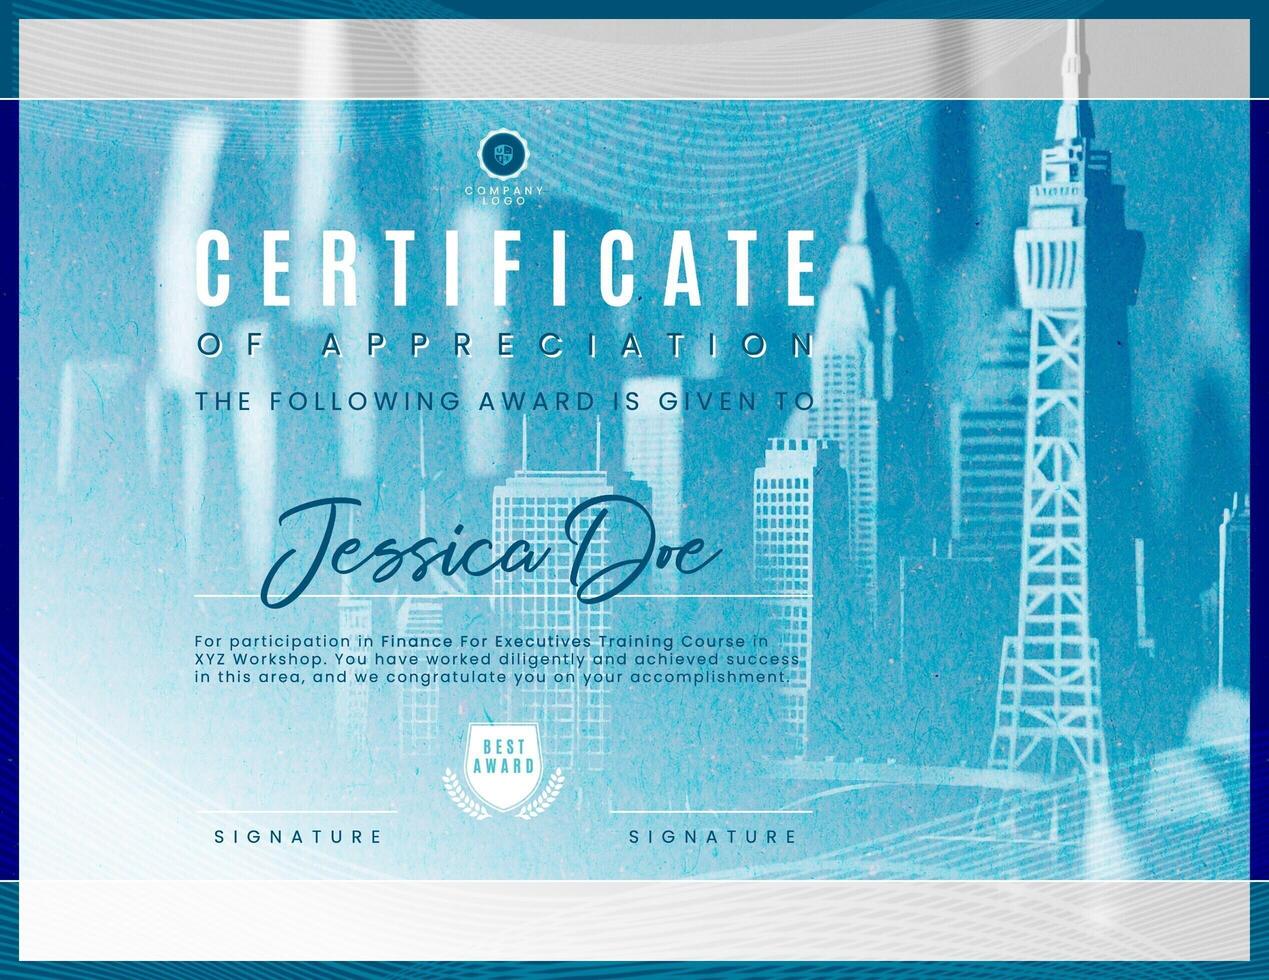 Certificate of Appreciation Template for Finance Training Course template